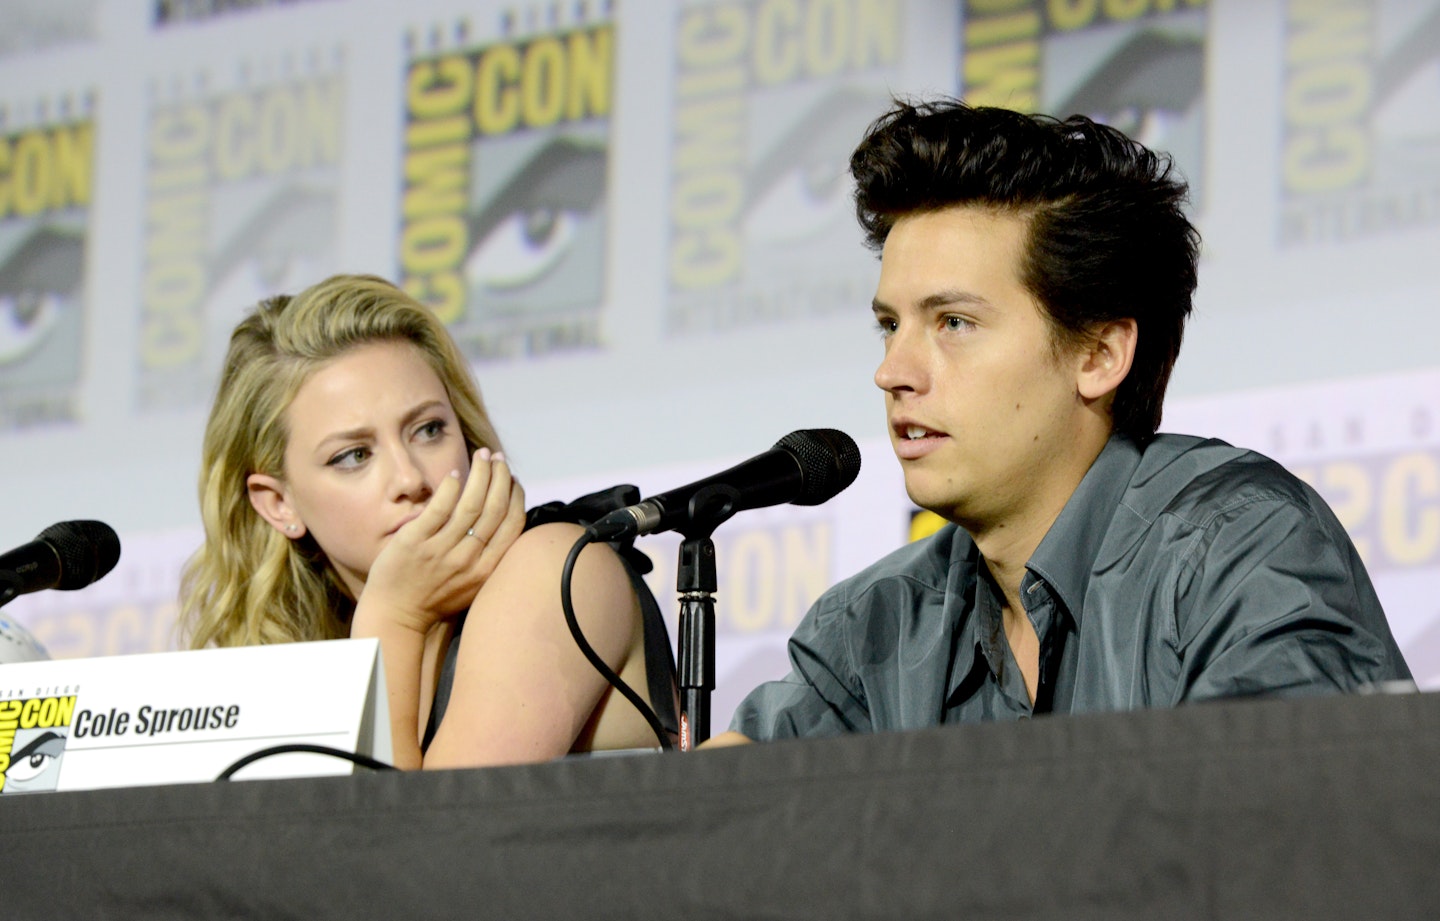 Lili Reinhart and Cole Sprouse at Comicon together 